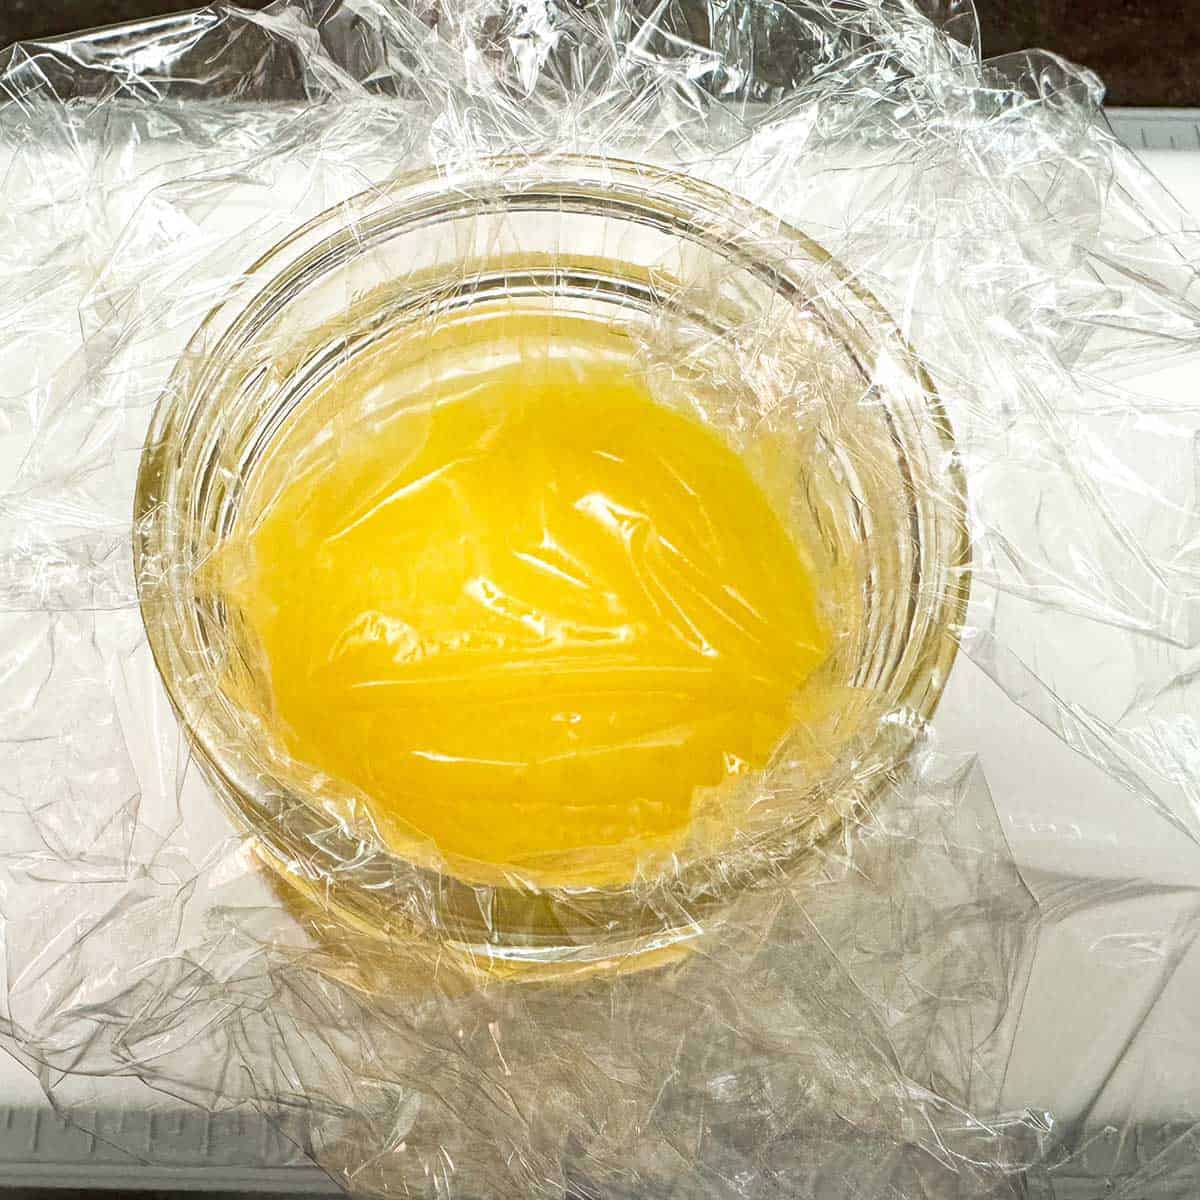 Lemon curd with plastic wrapped on top of the curd to prevent crusting.